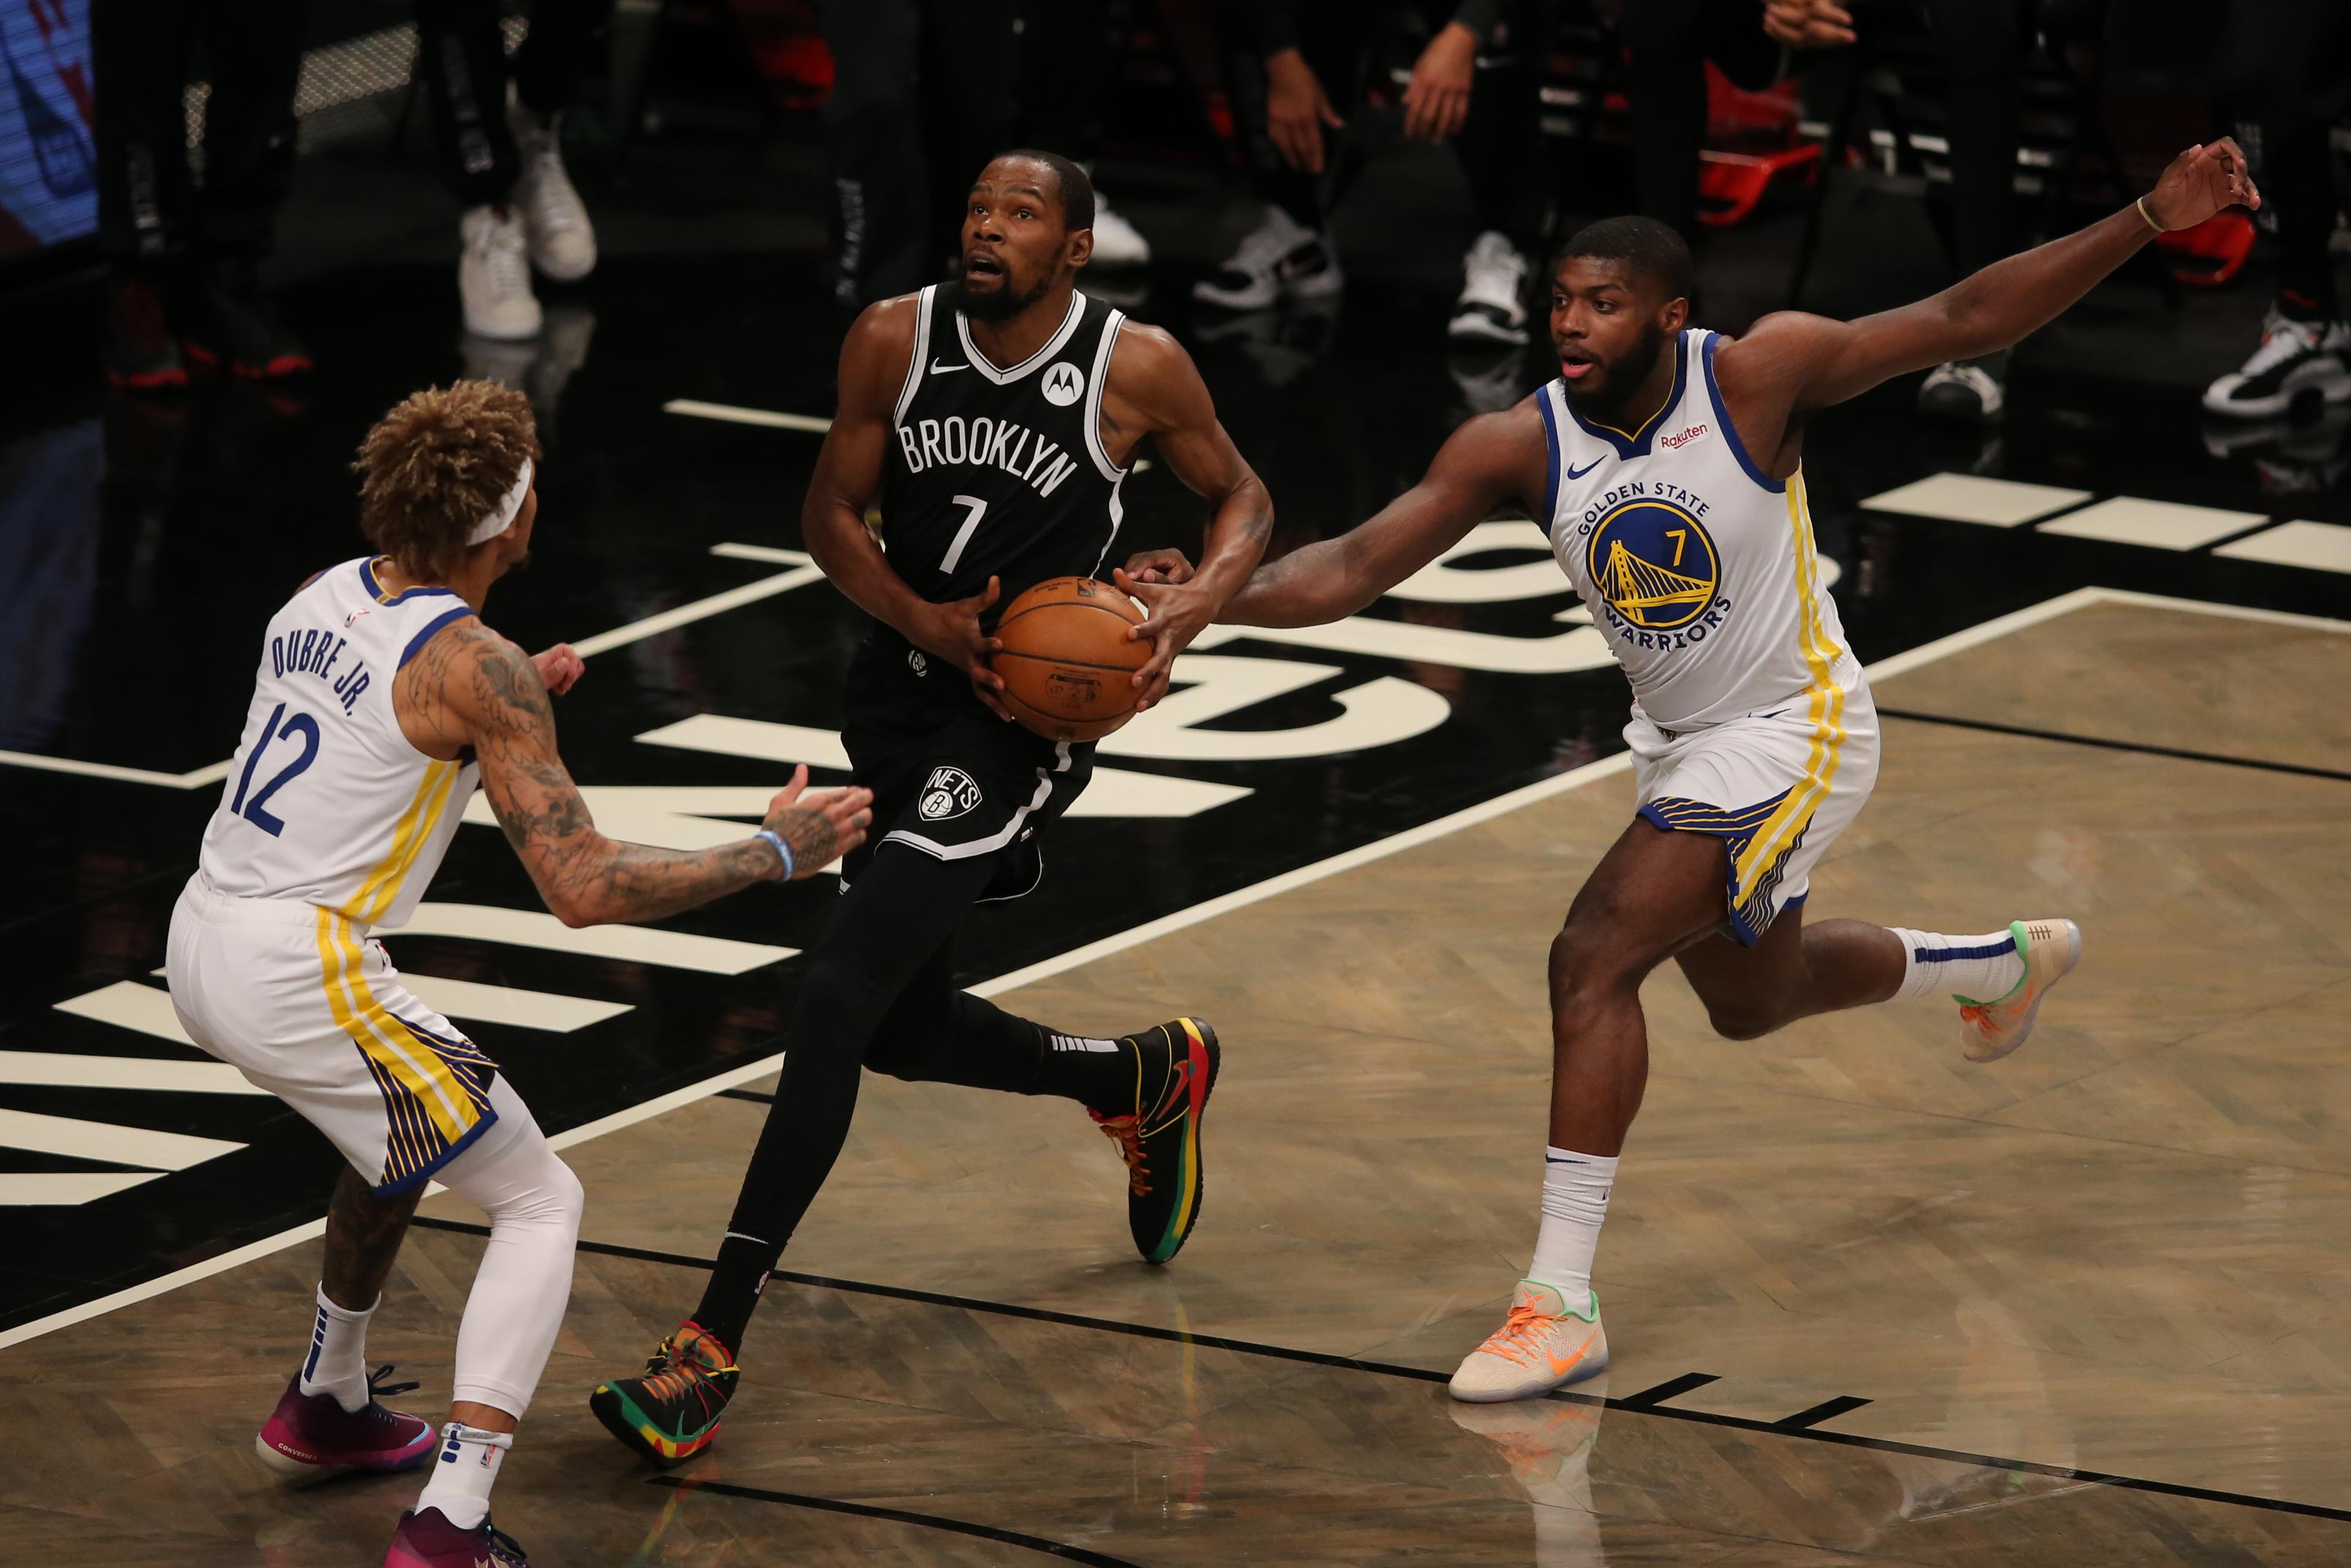 Dec 22, 2020; Brooklyn, New York, USA; Brooklyn Nets small forward Kevin Durant (7) drives against Golden State Warriors small forward Kelly Oubre Jr. (12) and power forward Eric Paschall (7) during the first quarter at Barclays Center. / Brad Penner-USA TODAY Sports